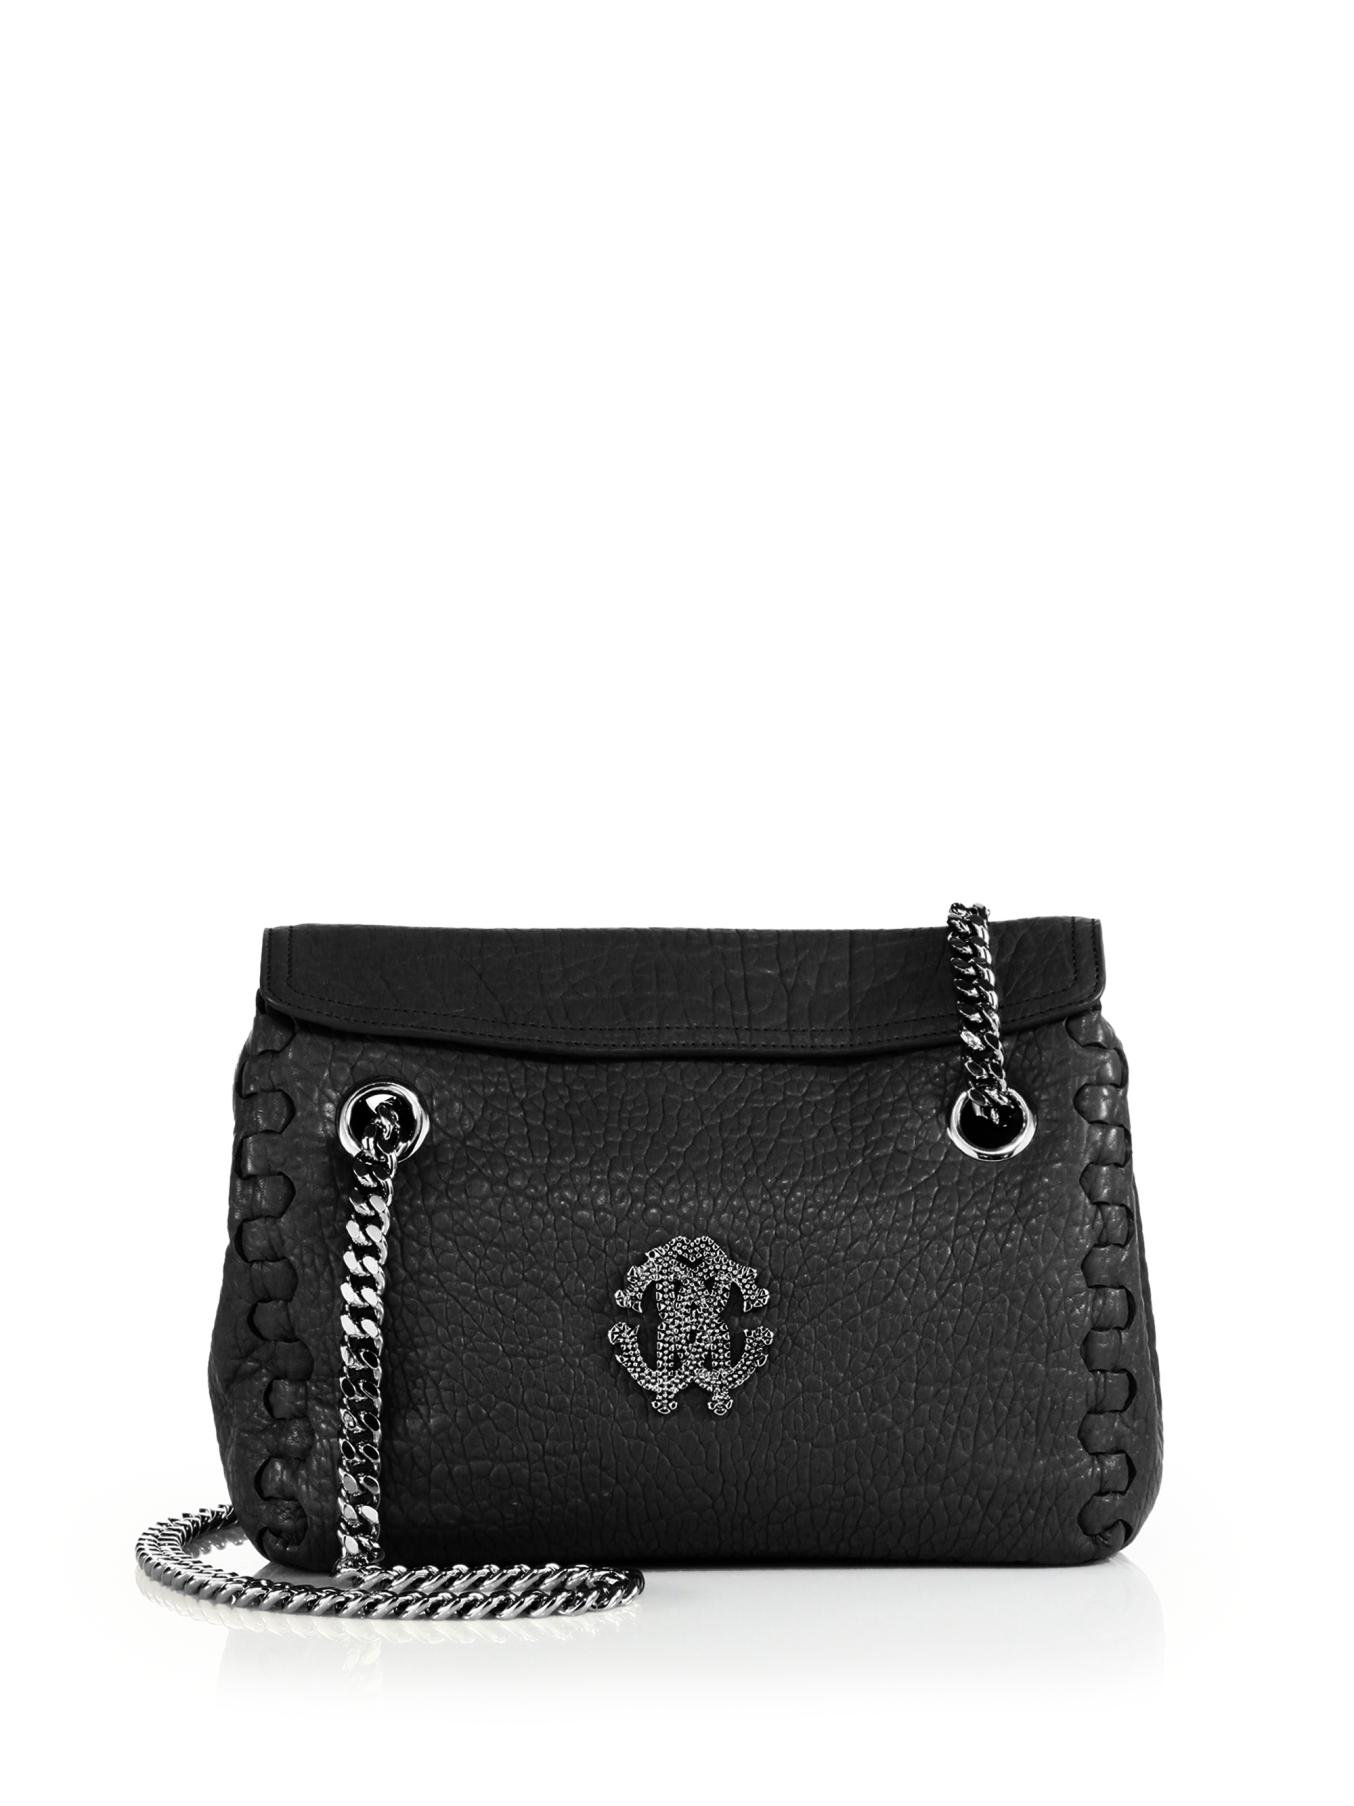 Roberto cavalli Pebbled Leather Chain Shoulder Bag in Black | Lyst